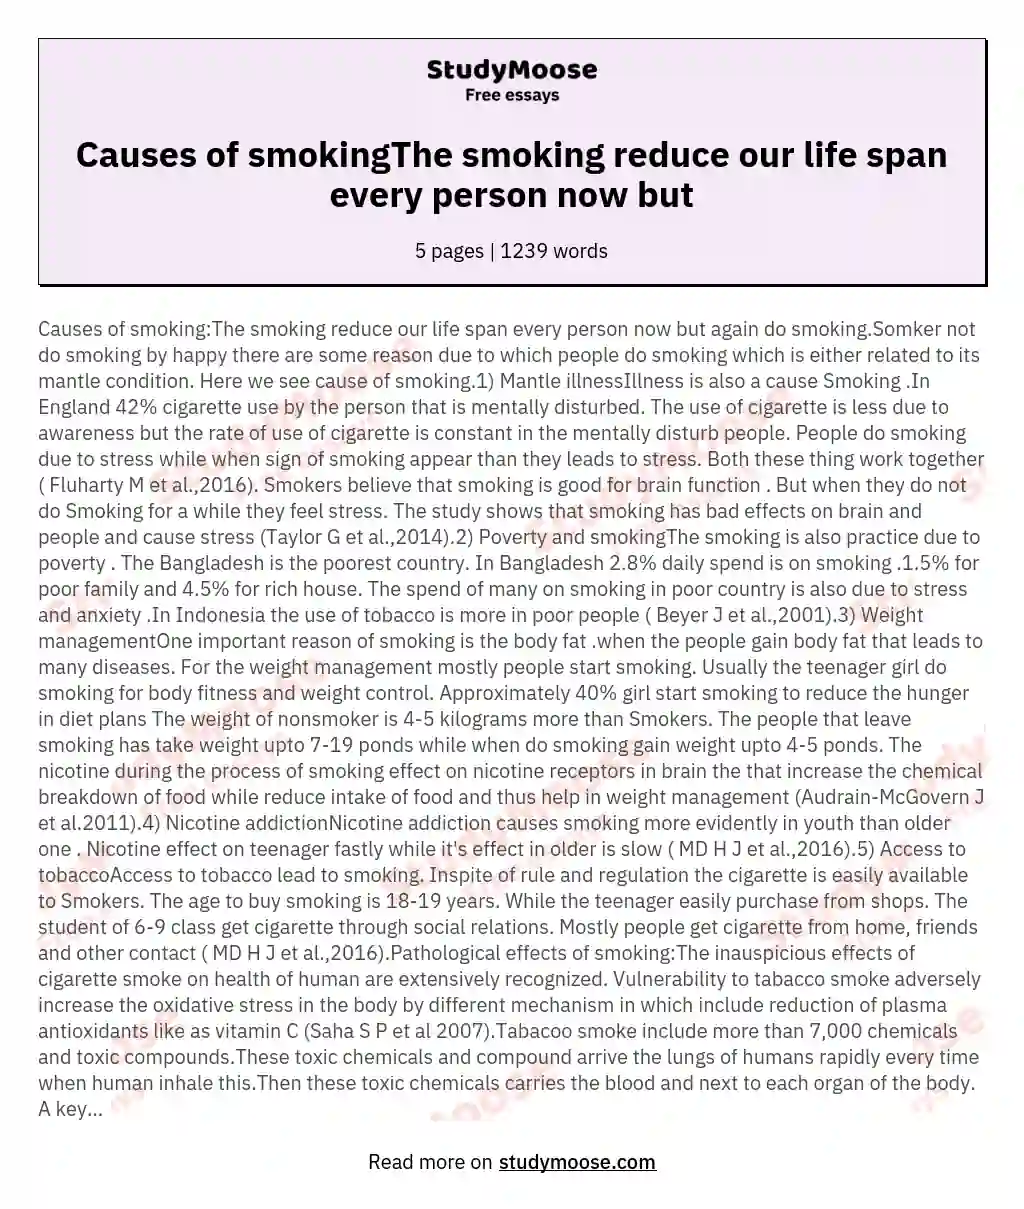 Causes of smokingThe smoking reduce our life span every person now but essay